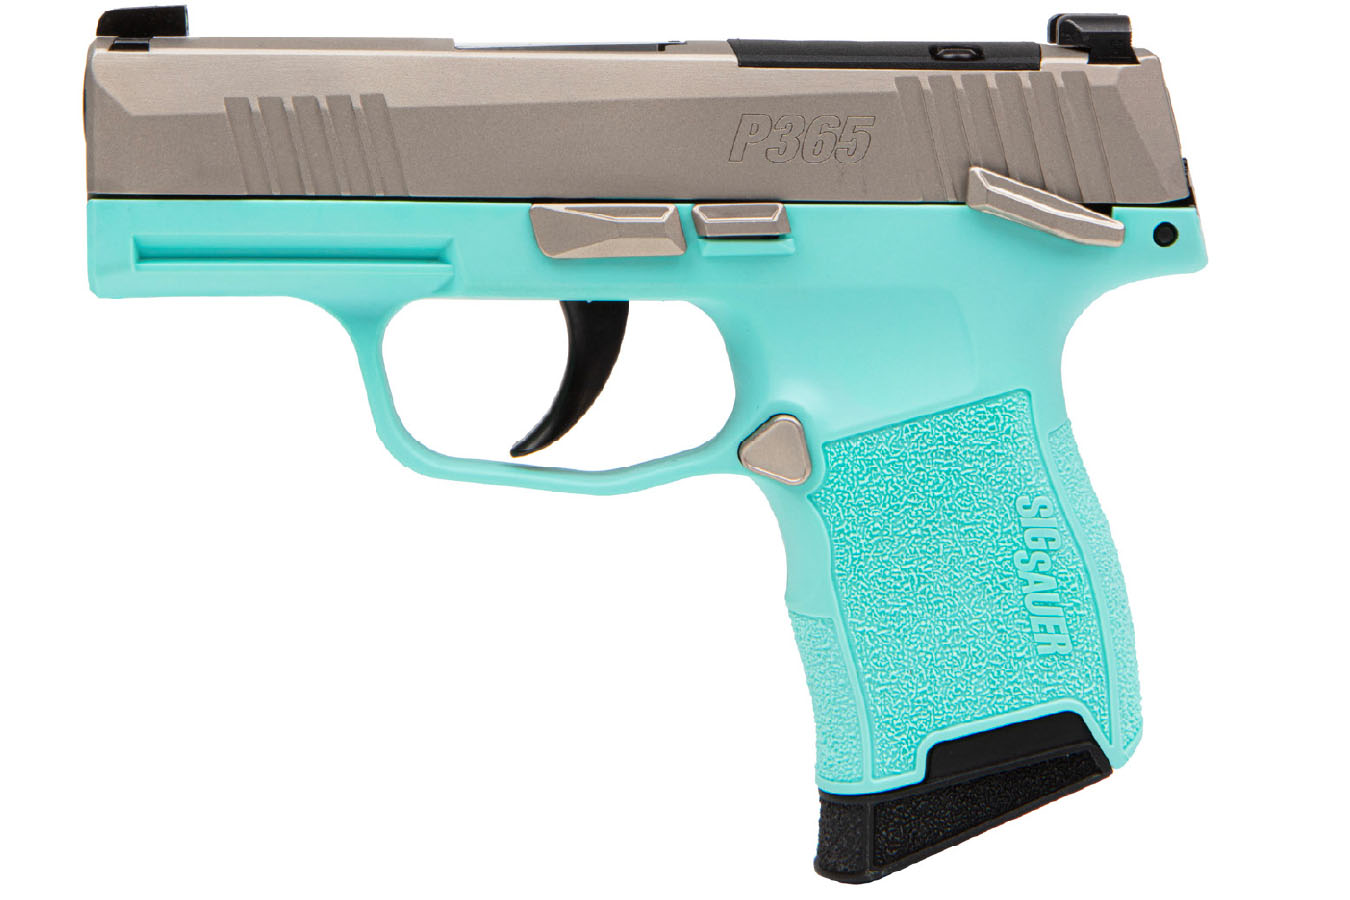 No. 14 Best Selling: SIG SAUER P365 380ACP 3.1` BARREL NICKEL AND TURQUOISE 2-10RND MAGS